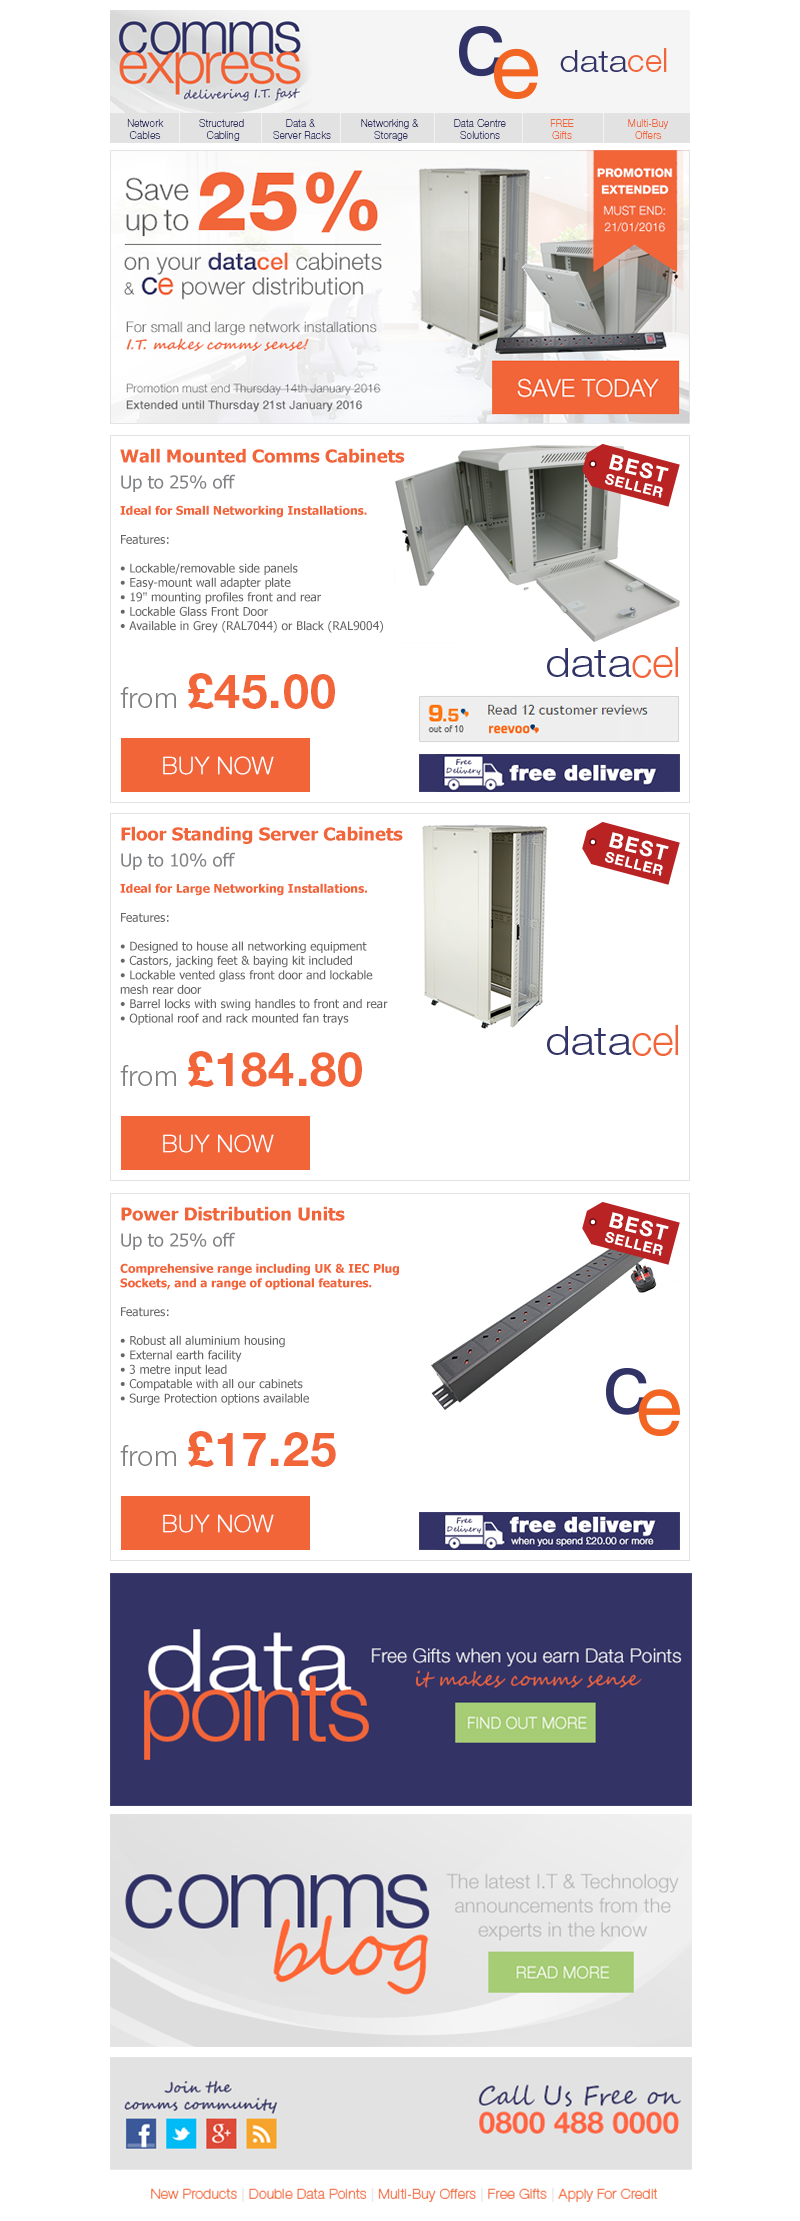 SAVE UP TO 25 with Datacel cabinets and CE power distri